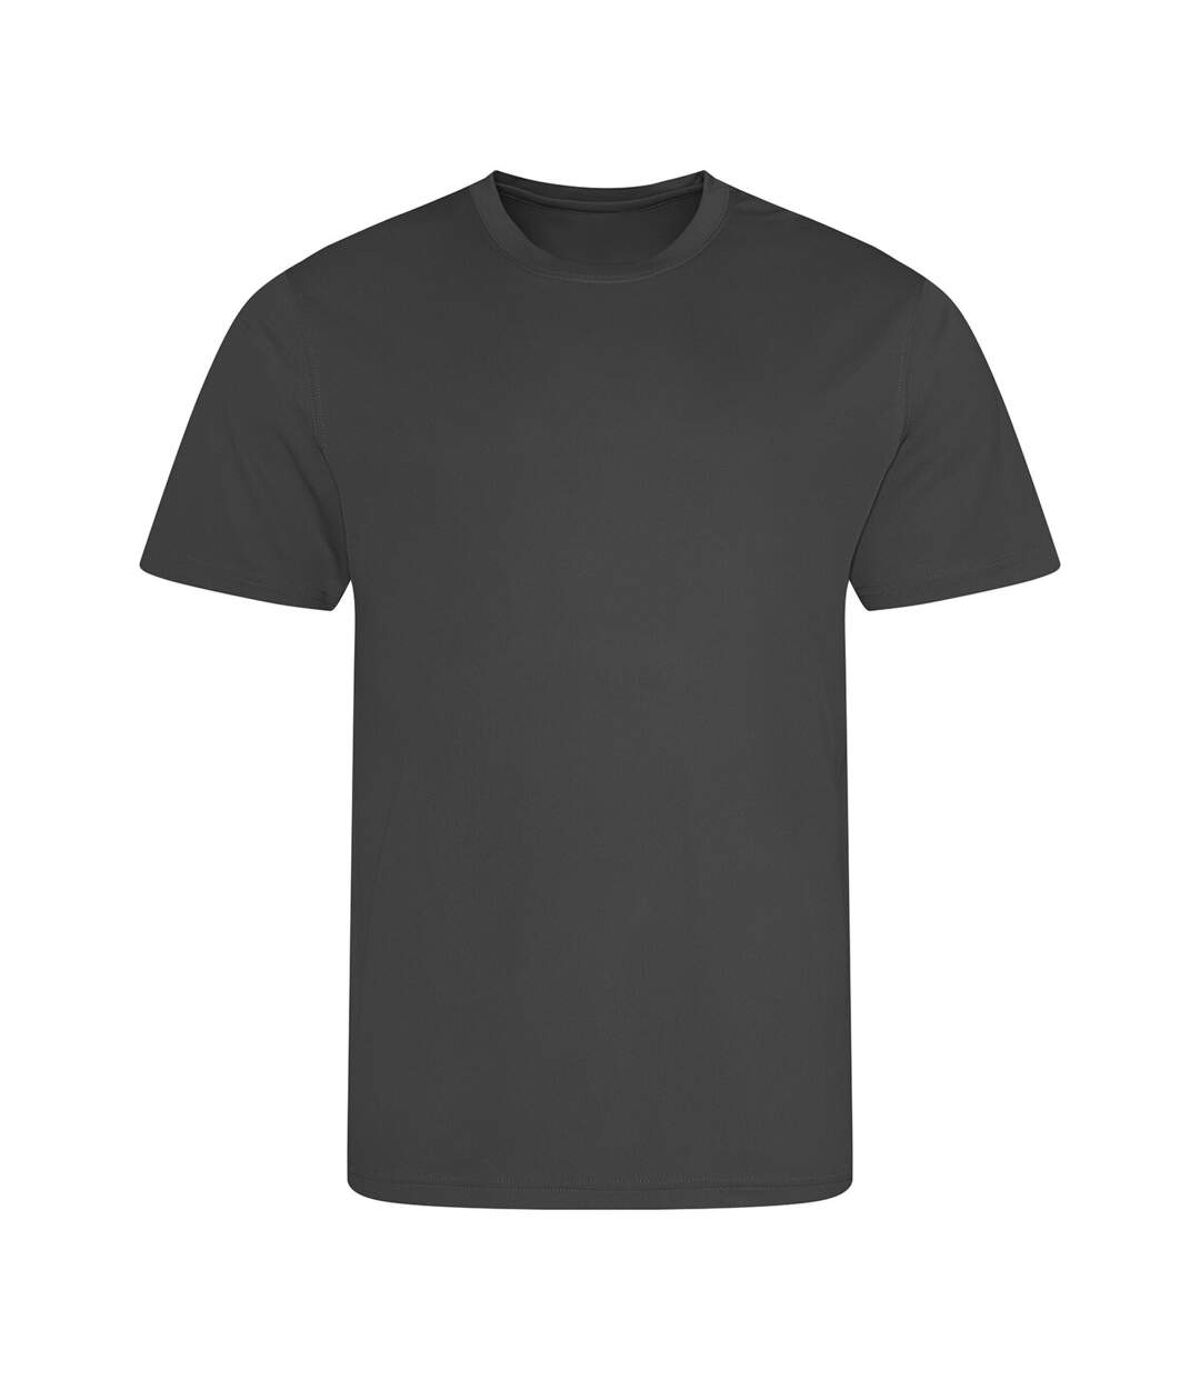 AWDis Cool Mens Recycled T-Shirt (Charcoal)